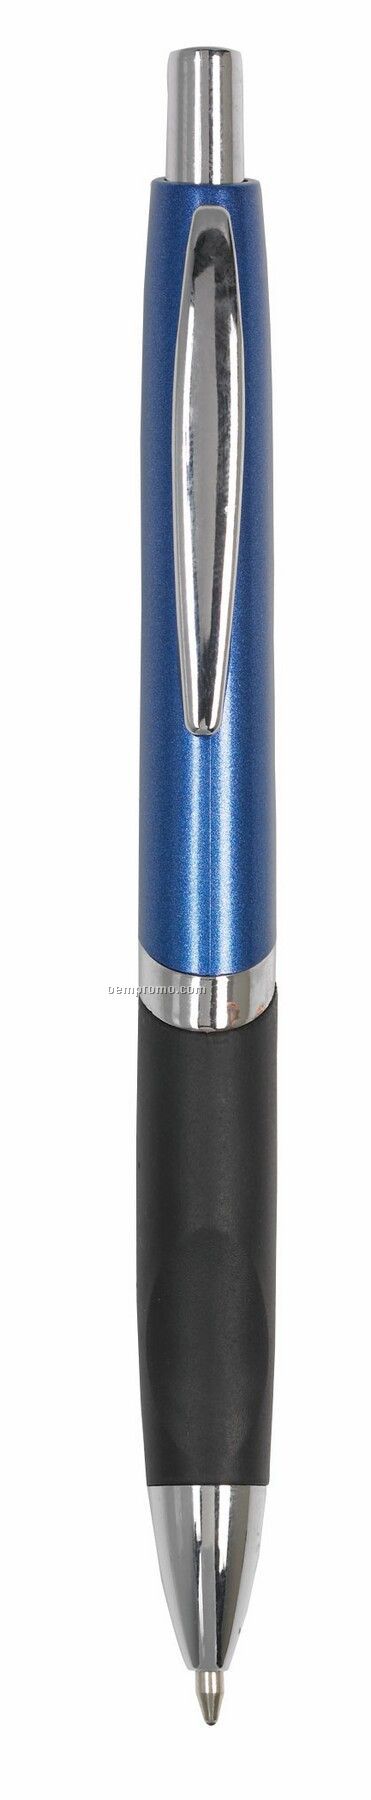 Orion Metallic Colored Ballpoint Pen W/ Tapered Grip